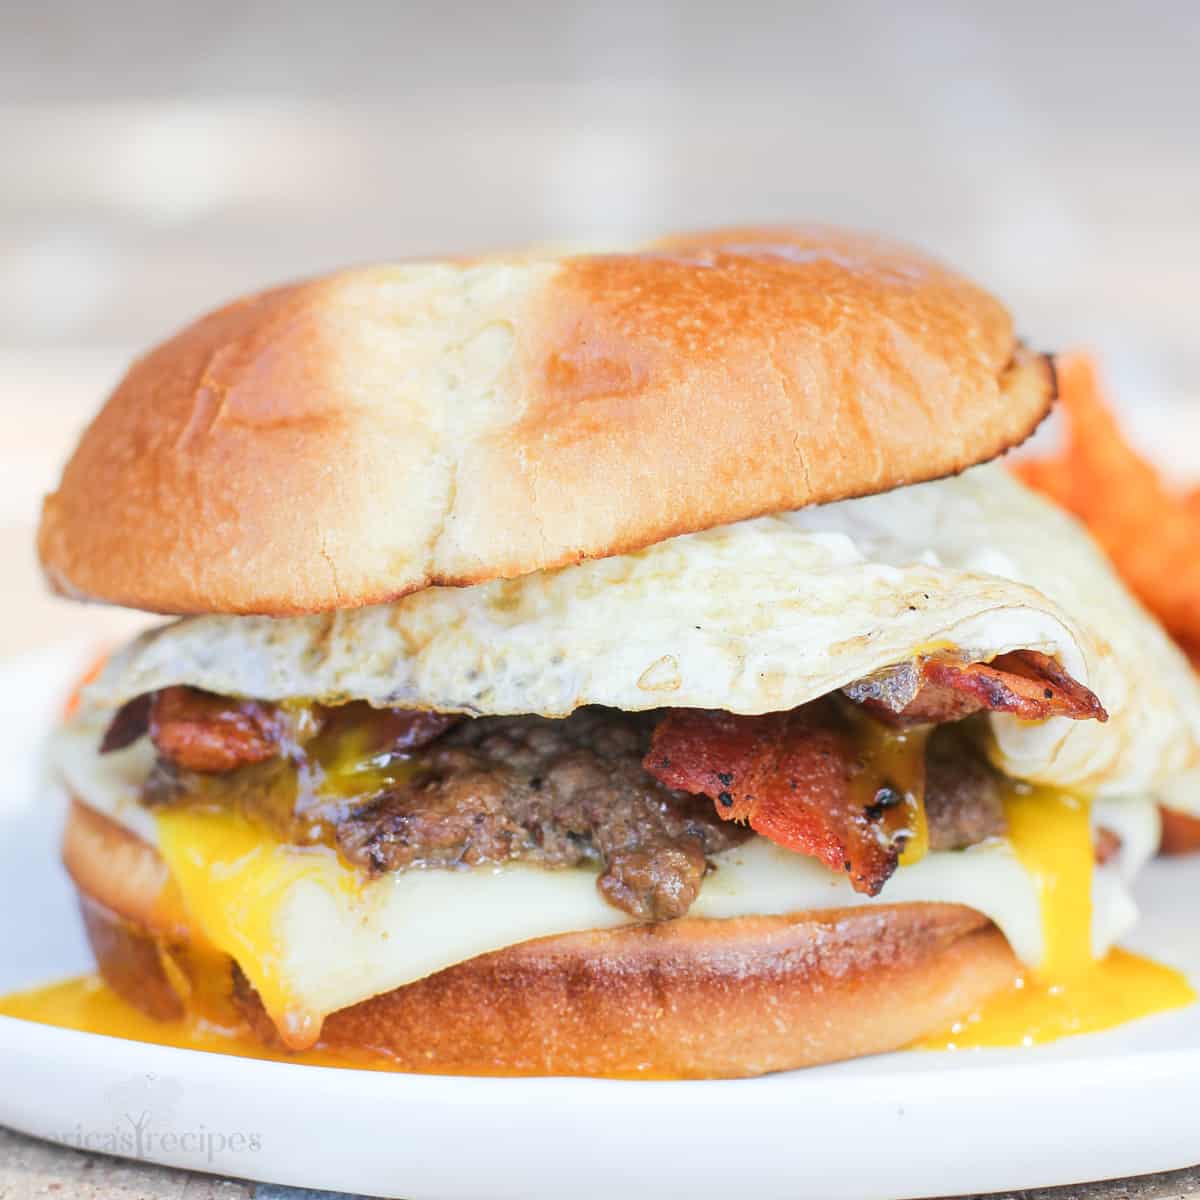 A burger topped with a fried egg.